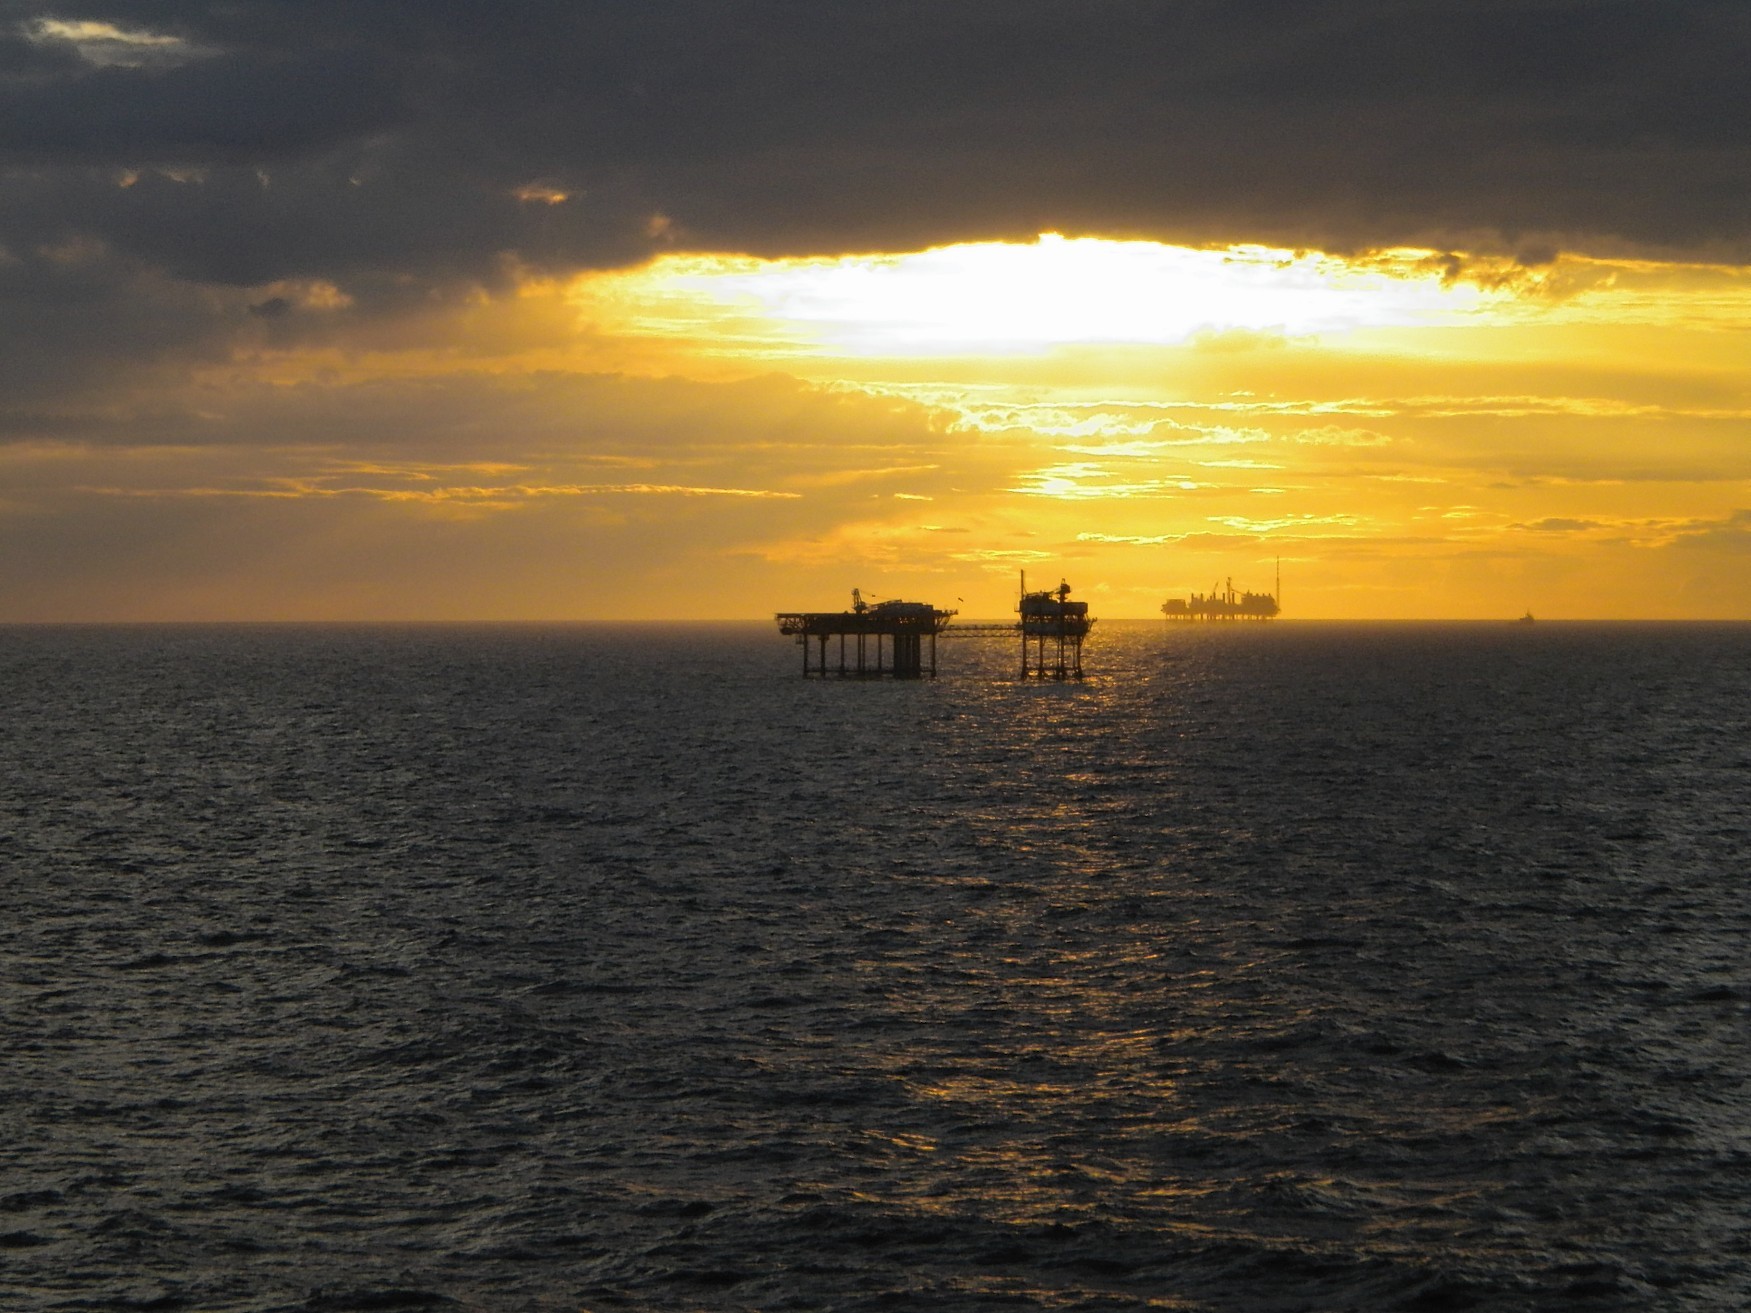 An unmanned gas platform in the southern North Sea